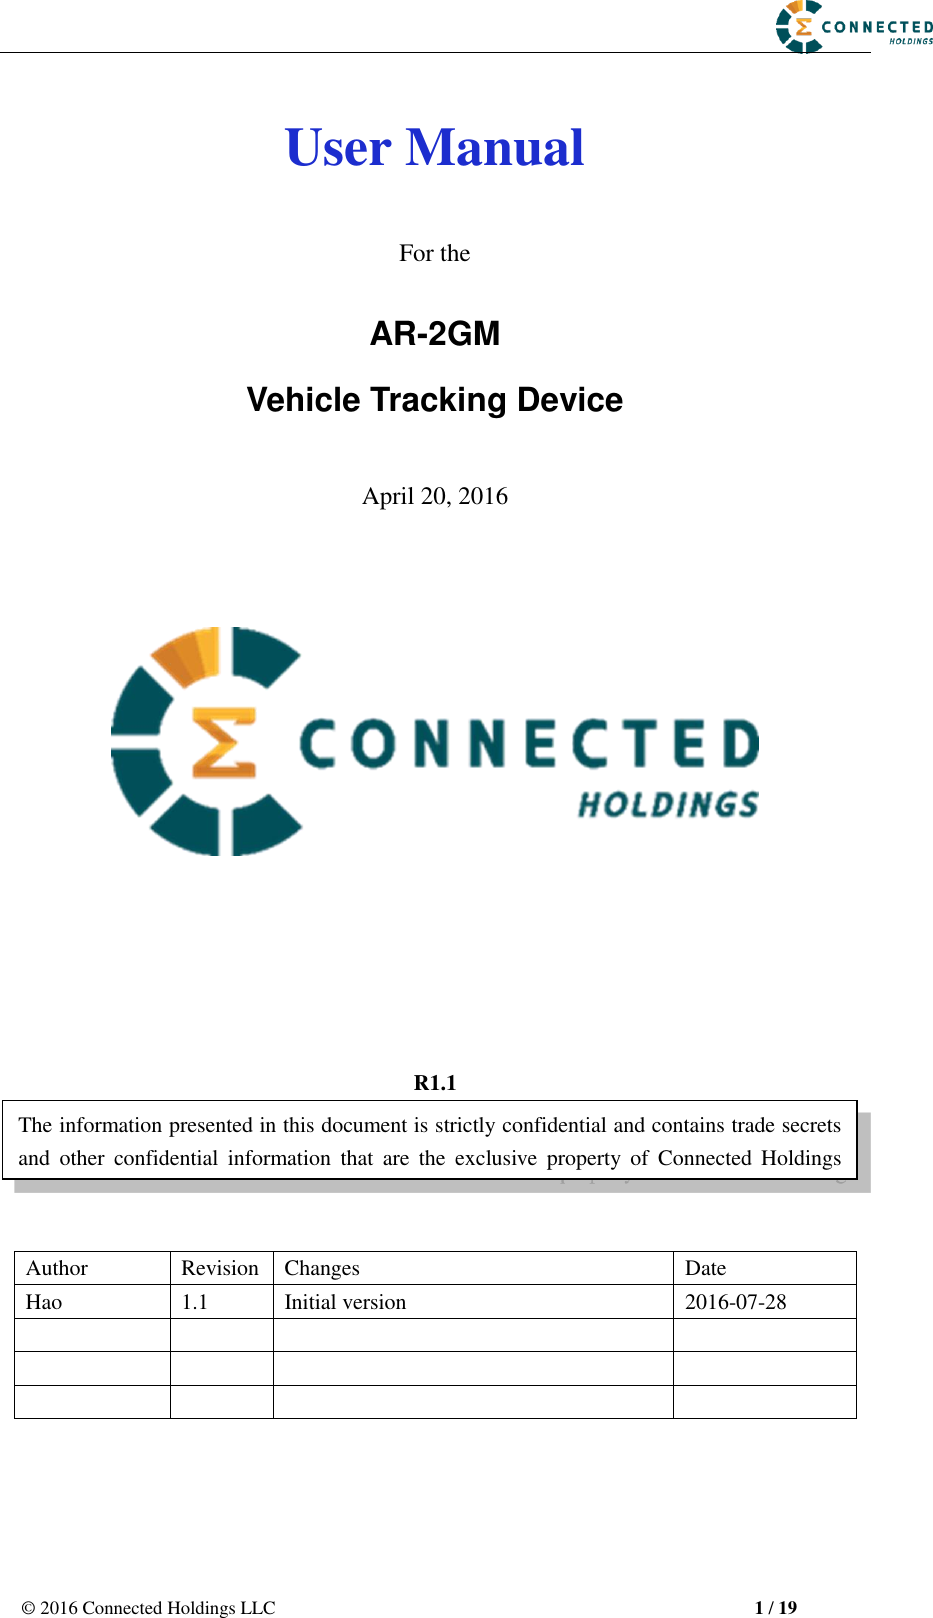 © 2016 Connected Holdings LLC  1 / 19 User Manual For the AR-2GM Vehicle Tracking DeviceApril 20, 2016 R1.1 Author Revision Changes Date Hao 1.1 Initial version 2016-07-28 The information presented in this document is strictly confidential and contains trade secrets and  other  confidential  information  that  are  the  exclusive  property  of  Connected  Holdings 